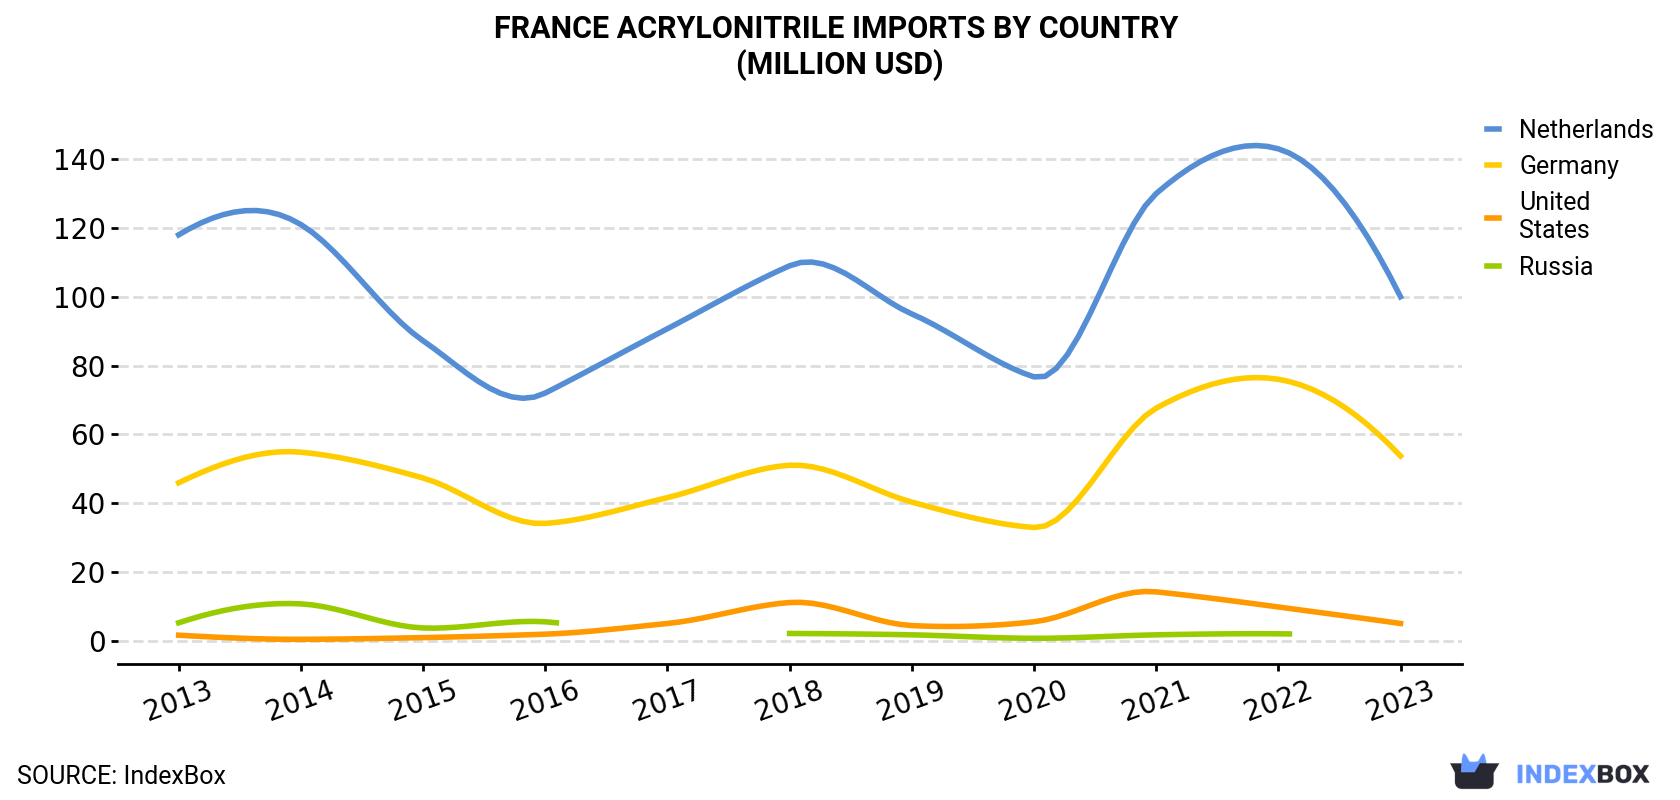 France Acrylonitrile Imports By Country (Million USD)